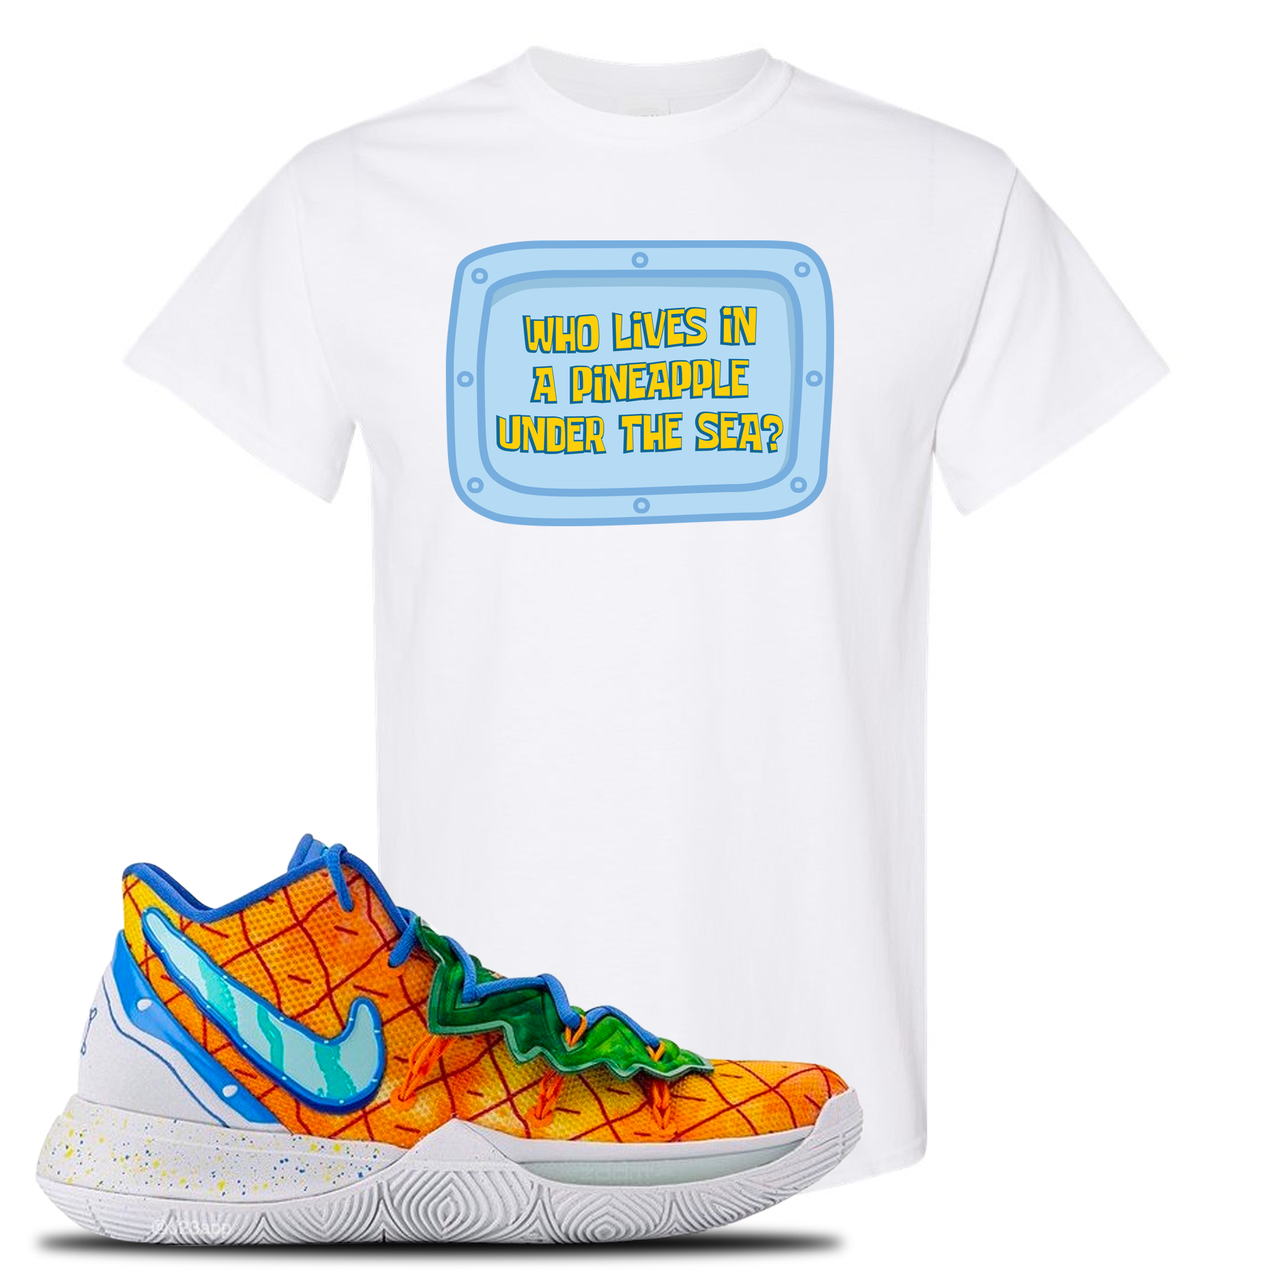 Kyrie 5 Pineapple House Who Lives in a Pineapple Under the Sea? White Sneaker Hook Up T-Shirt